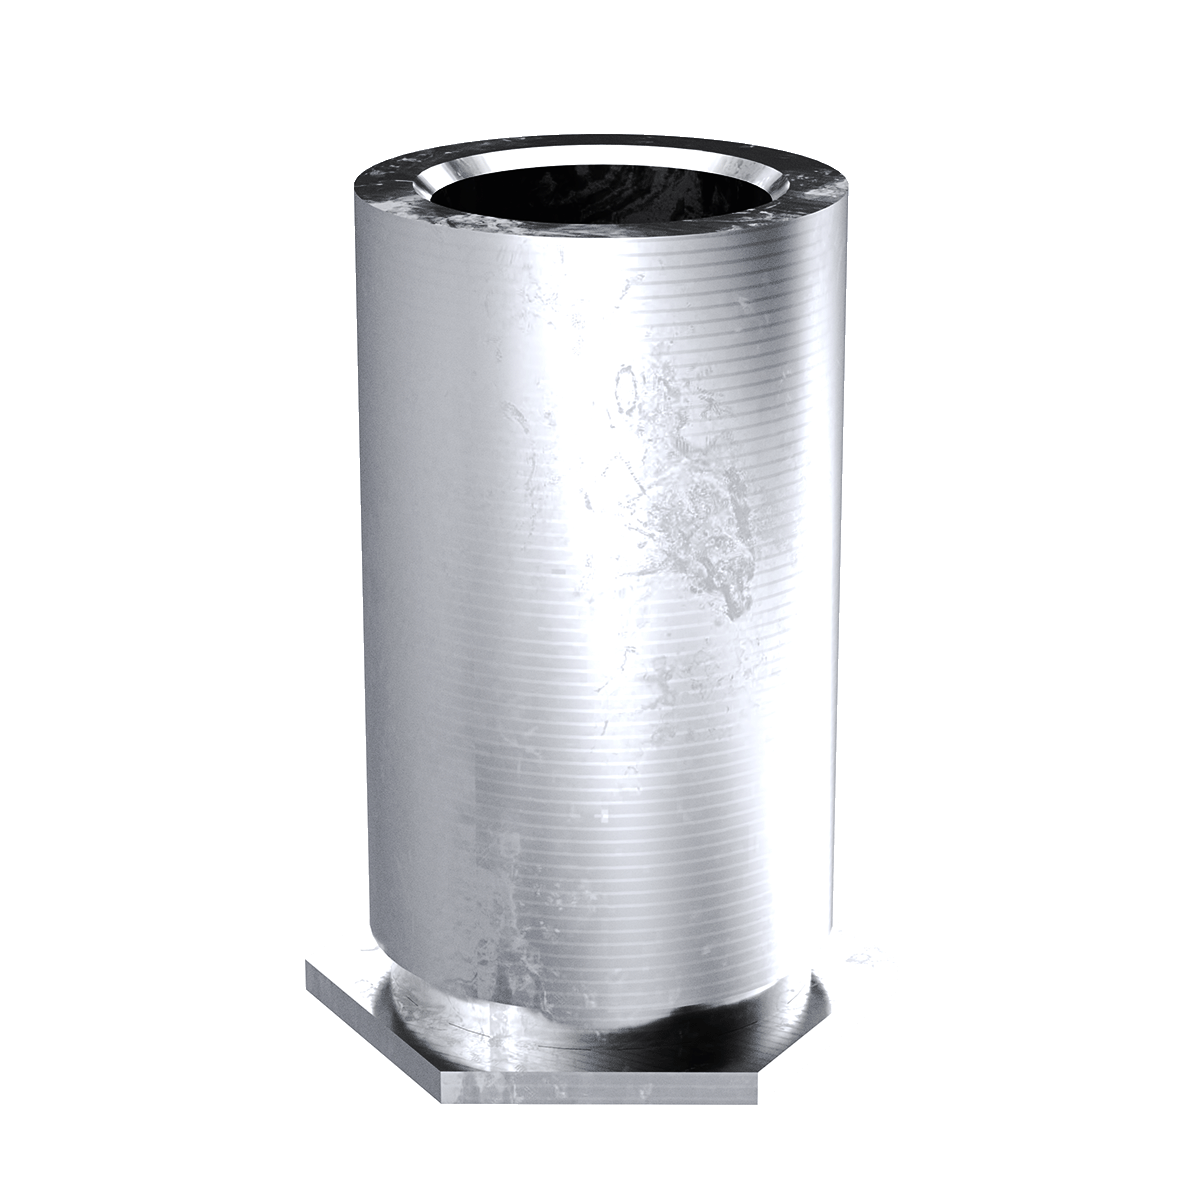 Self-Clinching Standoff, Through Unthreaded, 300 Series Stainless Steel, Passivated, 0.169 x 0.687, 100 Pack